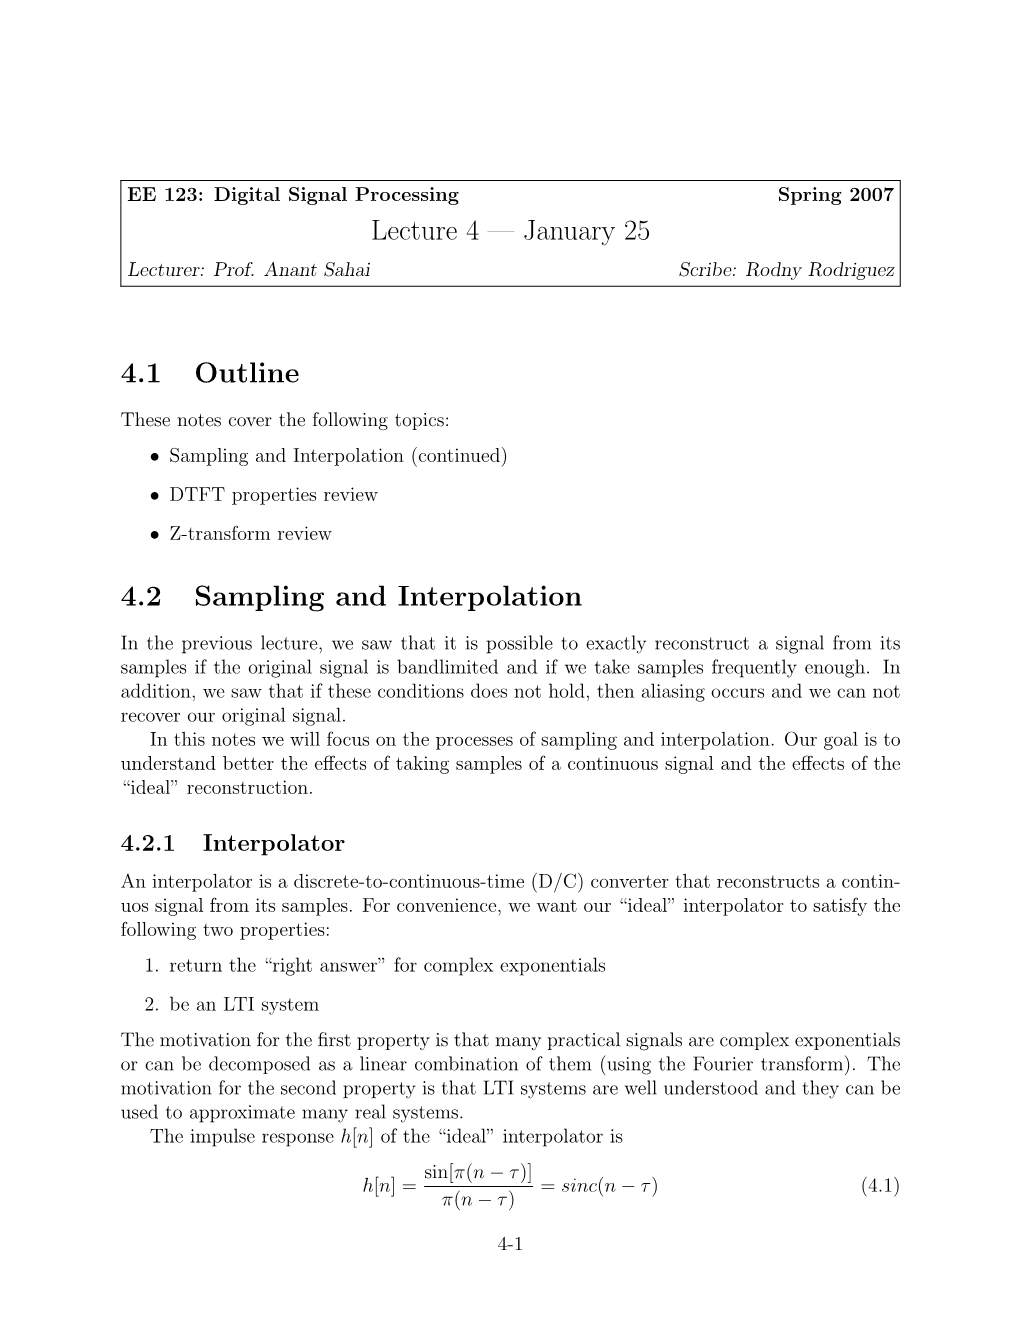 Lecture 4 — January 25 4.1 Outline 4.2 Sampling and Interpolation